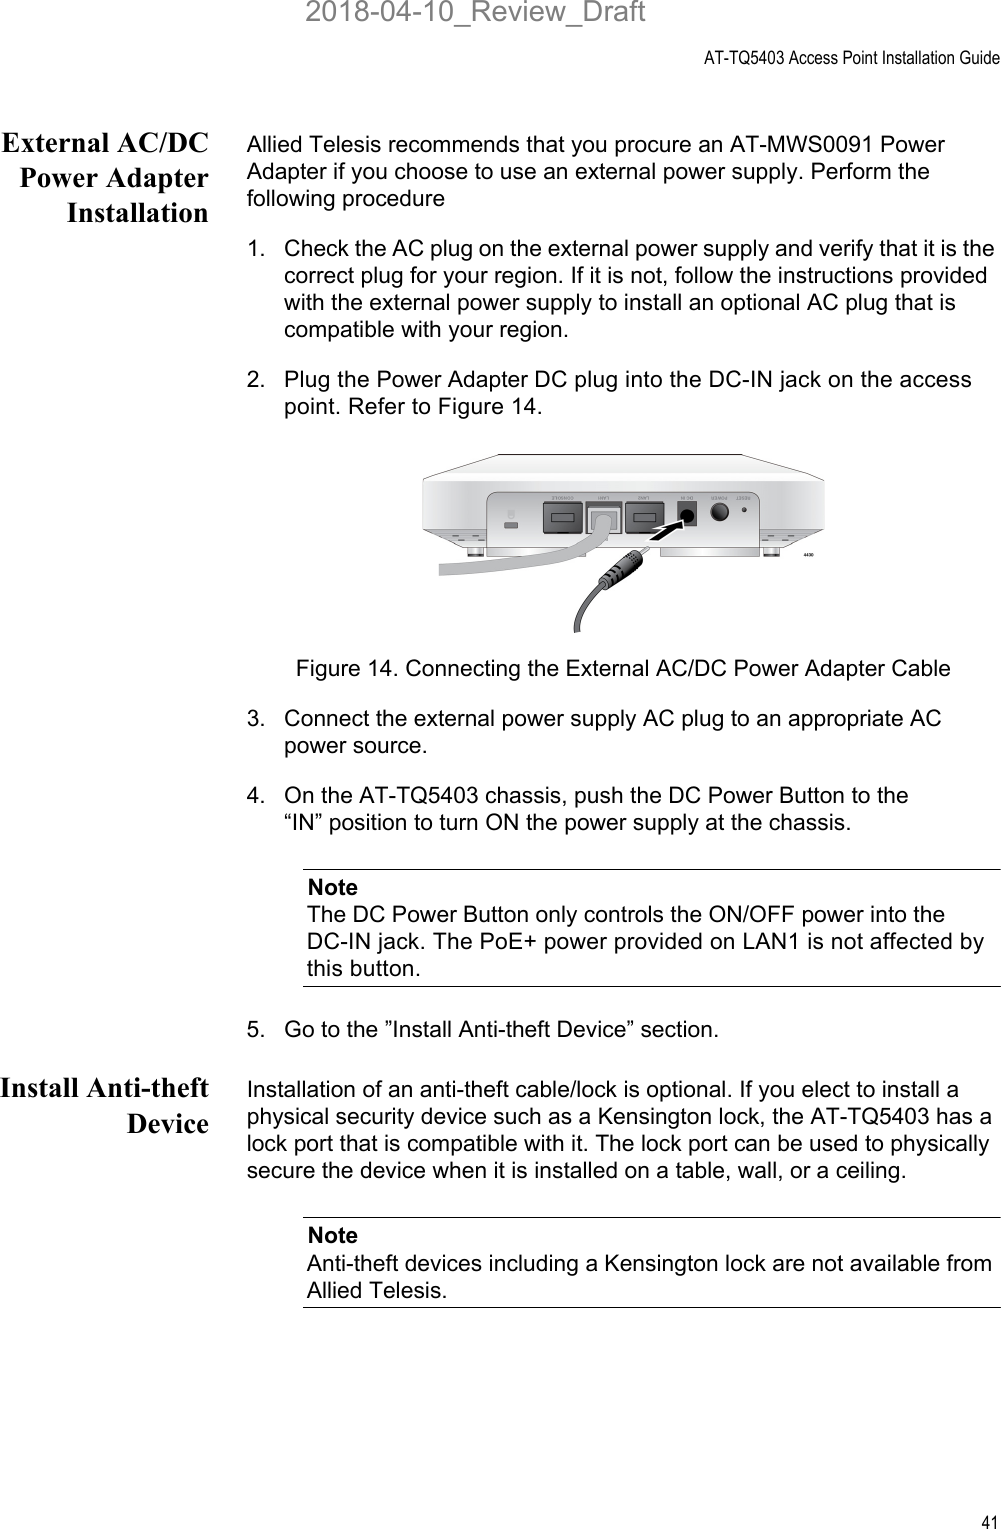 AT-TQ5403 Access Point Installation Guide41External AC/DCPower AdapterInstallationAllied Telesis recommends that you procure an AT-MWS0091 Power Adapter if you choose to use an external power supply. Perform the following procedure1. Check the AC plug on the external power supply and verify that it is the correct plug for your region. If it is not, follow the instructions provided with the external power supply to install an optional AC plug that is compatible with your region. 2. Plug the Power Adapter DC plug into the DC-IN jack on the access point. Refer to Figure 14.Figure 14. Connecting the External AC/DC Power Adapter Cable3. Connect the external power supply AC plug to an appropriate AC power source.4. On the AT-TQ5403 chassis, push the DC Power Button to the “IN” position to turn ON the power supply at the chassis.NoteThe DC Power Button only controls the ON/OFF power into the DC-IN jack. The PoE+ power provided on LAN1 is not affected by this button.5. Go to the ”Install Anti-theft Device” section.Install Anti-theftDeviceInstallation of an anti-theft cable/lock is optional. If you elect to install a physical security device such as a Kensington lock, the AT-TQ5403 has a lock port that is compatible with it. The lock port can be used to physically secure the device when it is installed on a table, wall, or a ceiling. NoteAnti-theft devices including a Kensington lock are not available from Allied Telesis.2018-04-10_Review_Draft